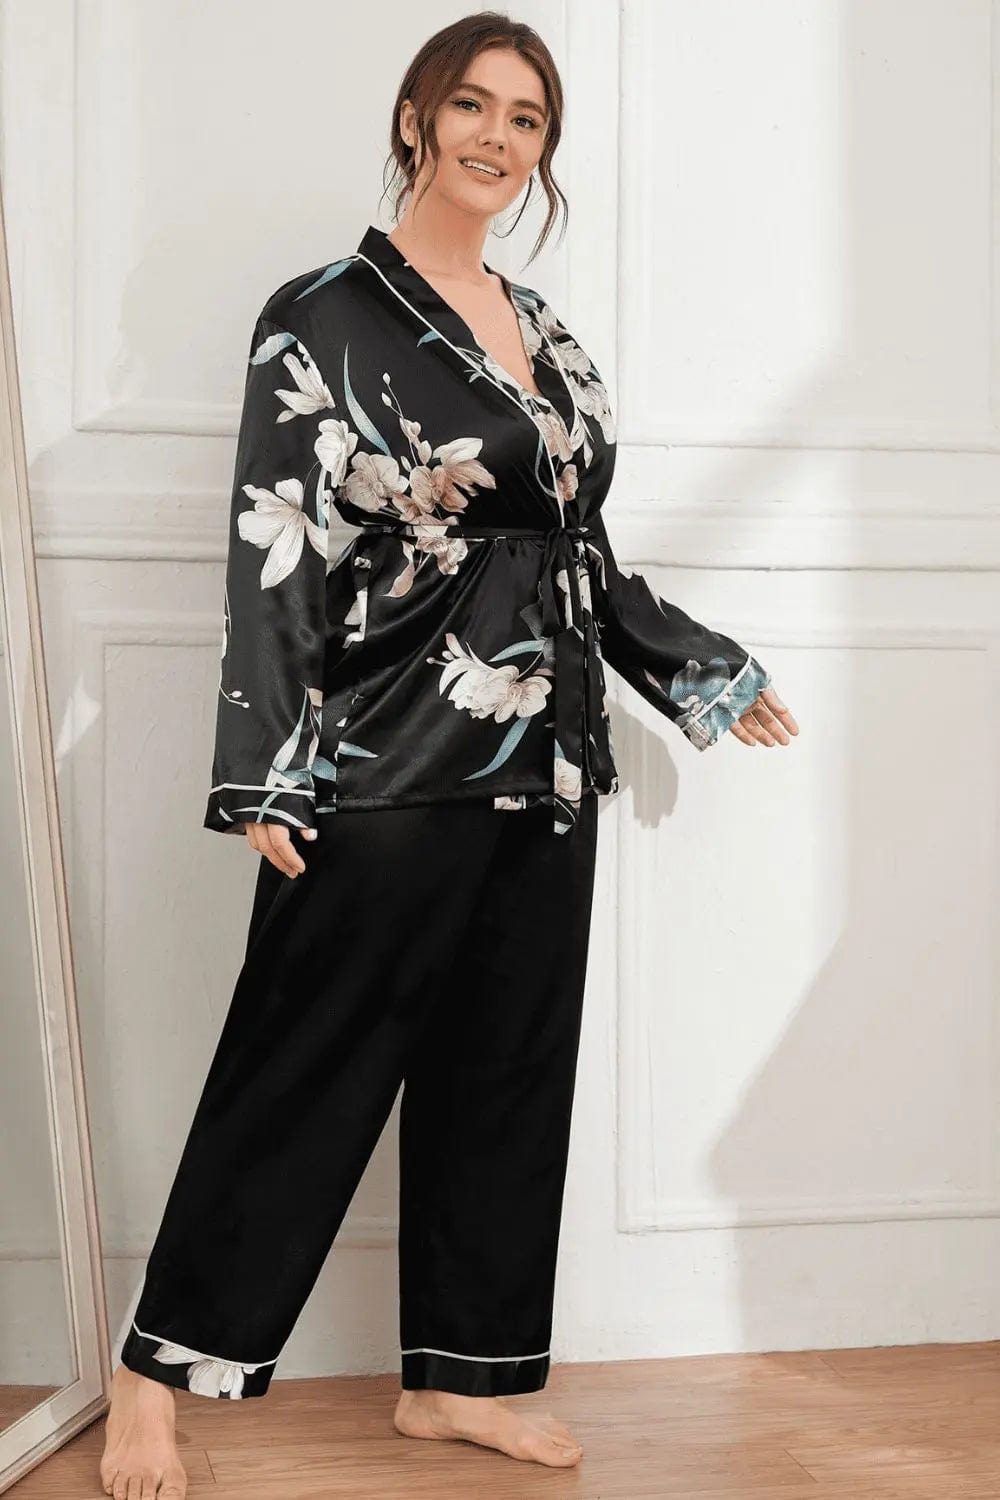 Plus Size Floral Belted Robe and Pants Pajama Set - CLASSY CLOSET BOUTIQUEPlus Size Floral Belted Robe and Pants Pajama Setloungewear plus100100798570977100100798570977Black1XL